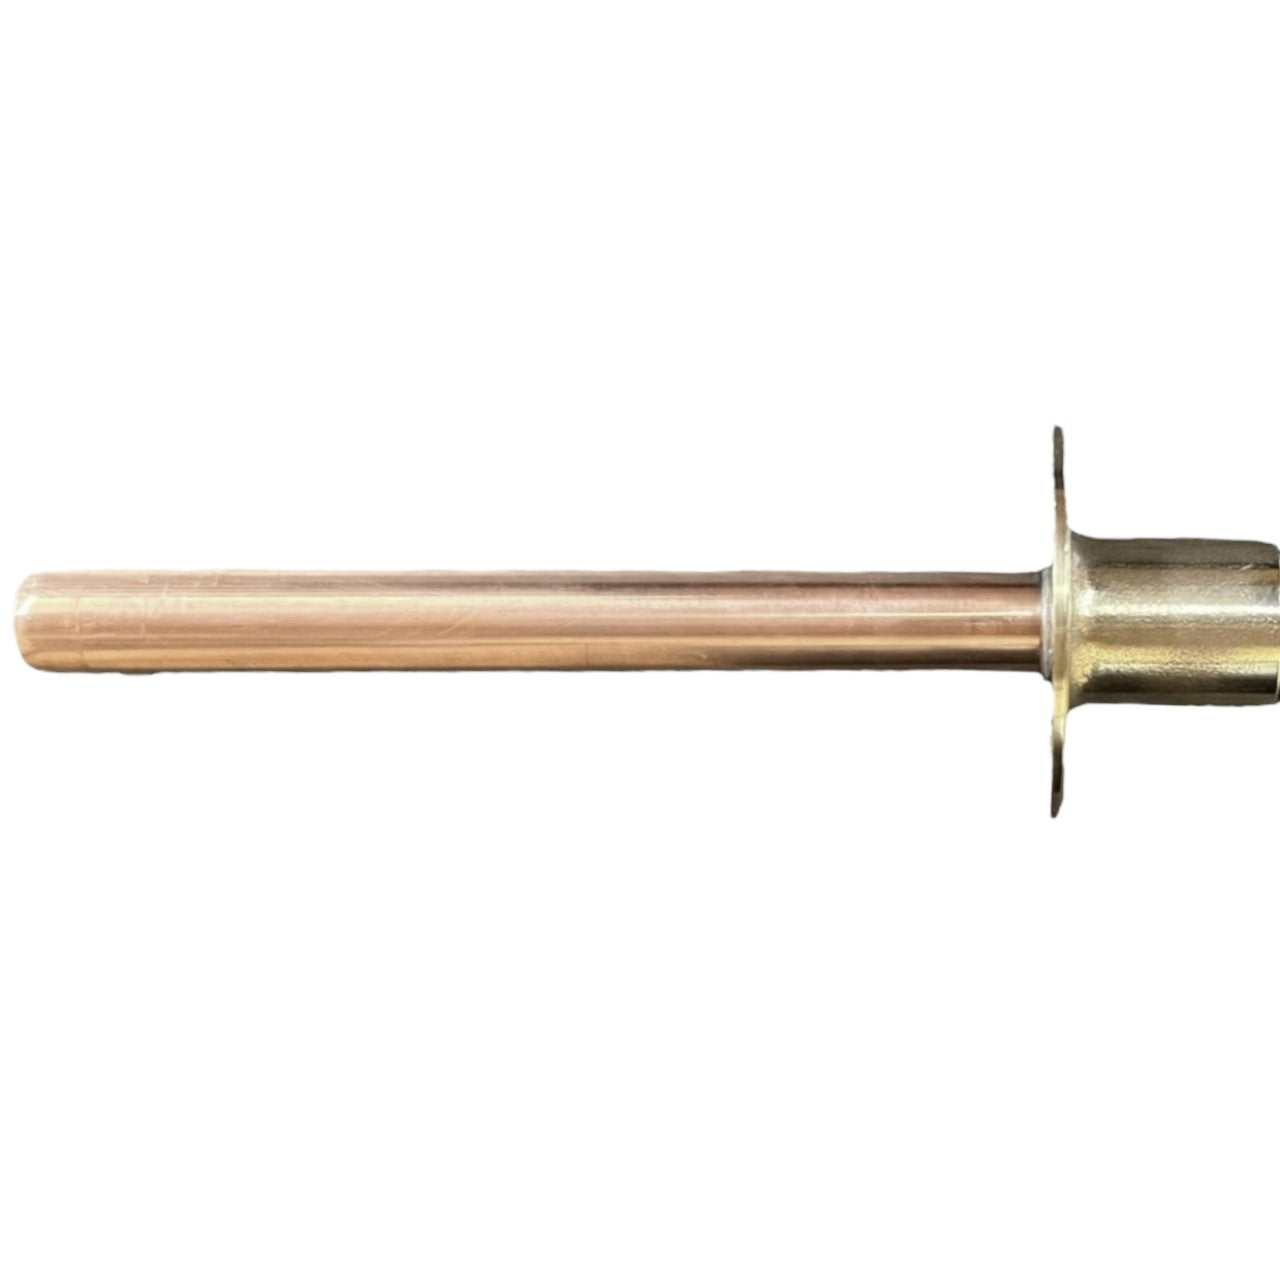 Brass wall mounted kitchen tap with 15mm tail ends sold by All Things French Store